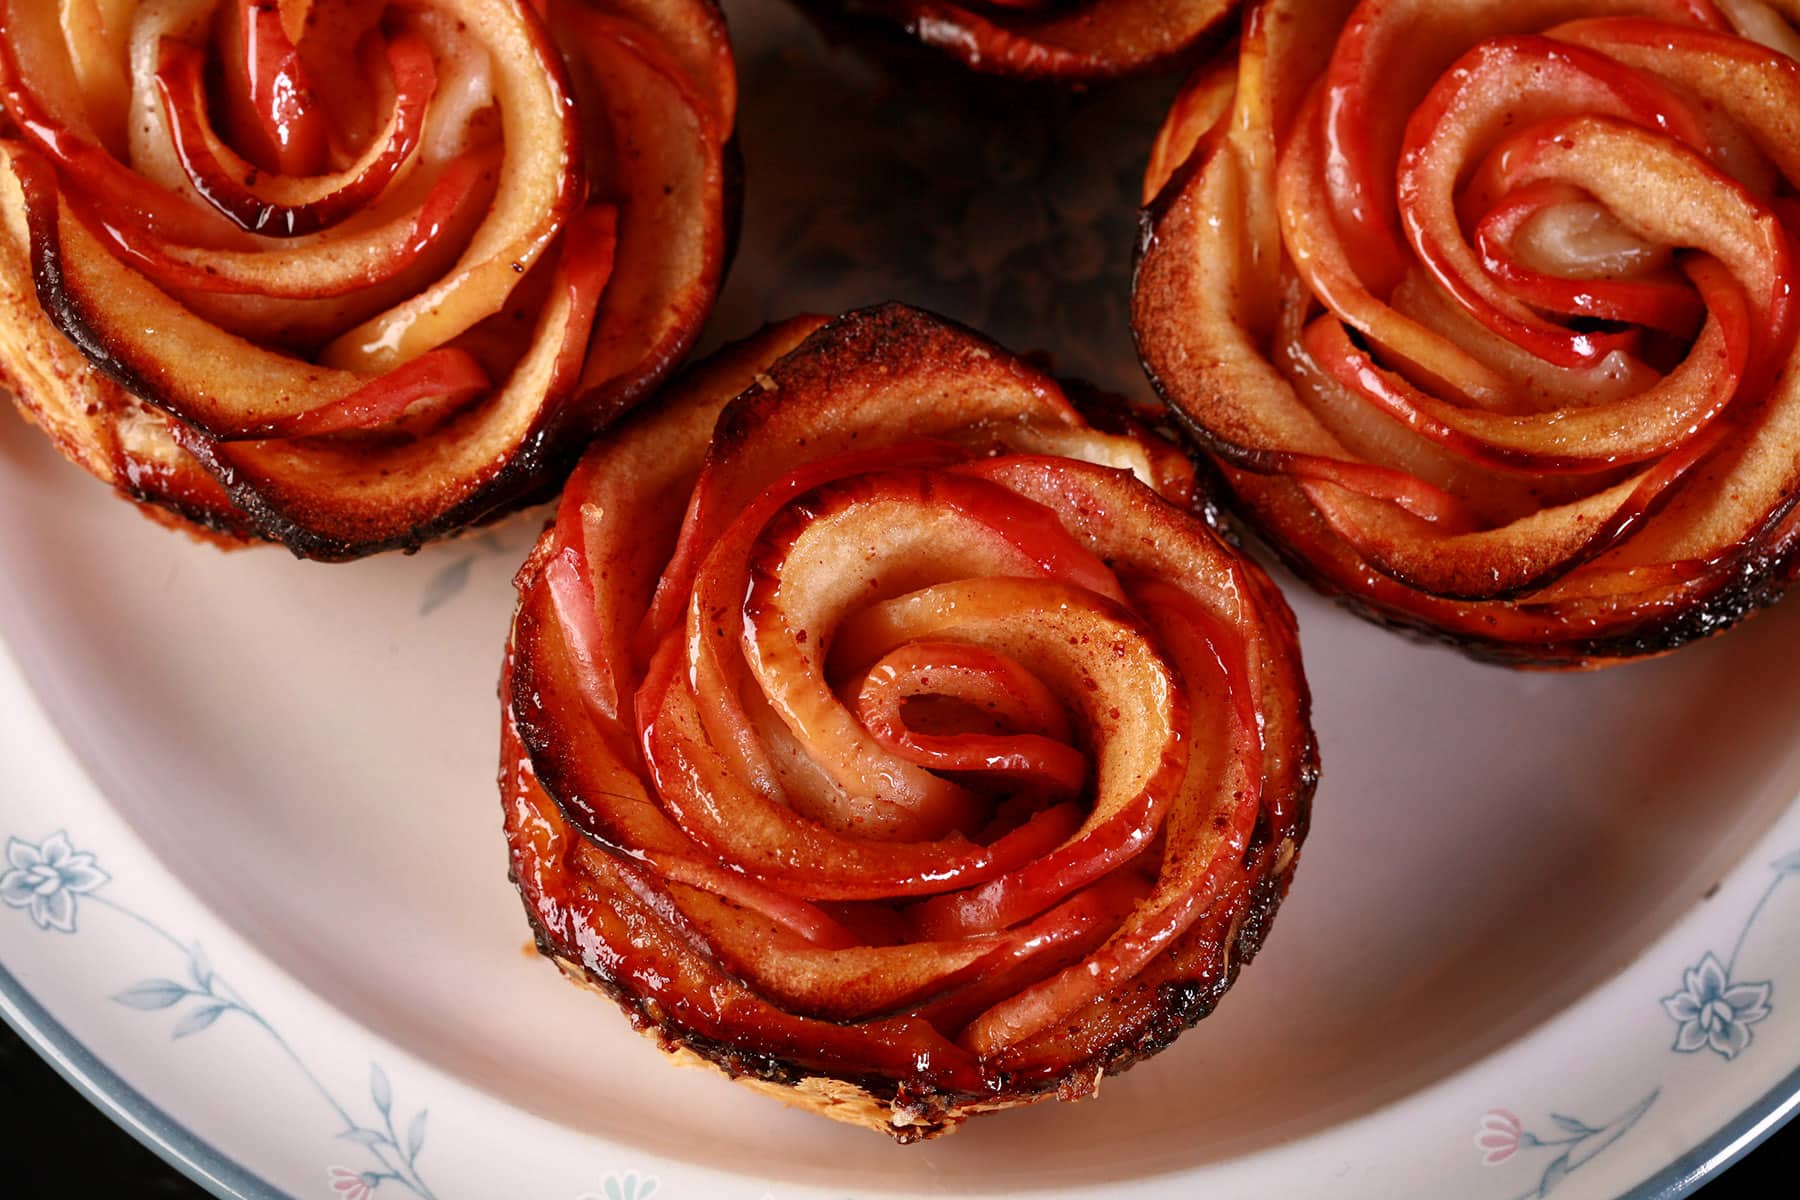 Maple syrup glazed apple roses with puff pastry, on a plate.